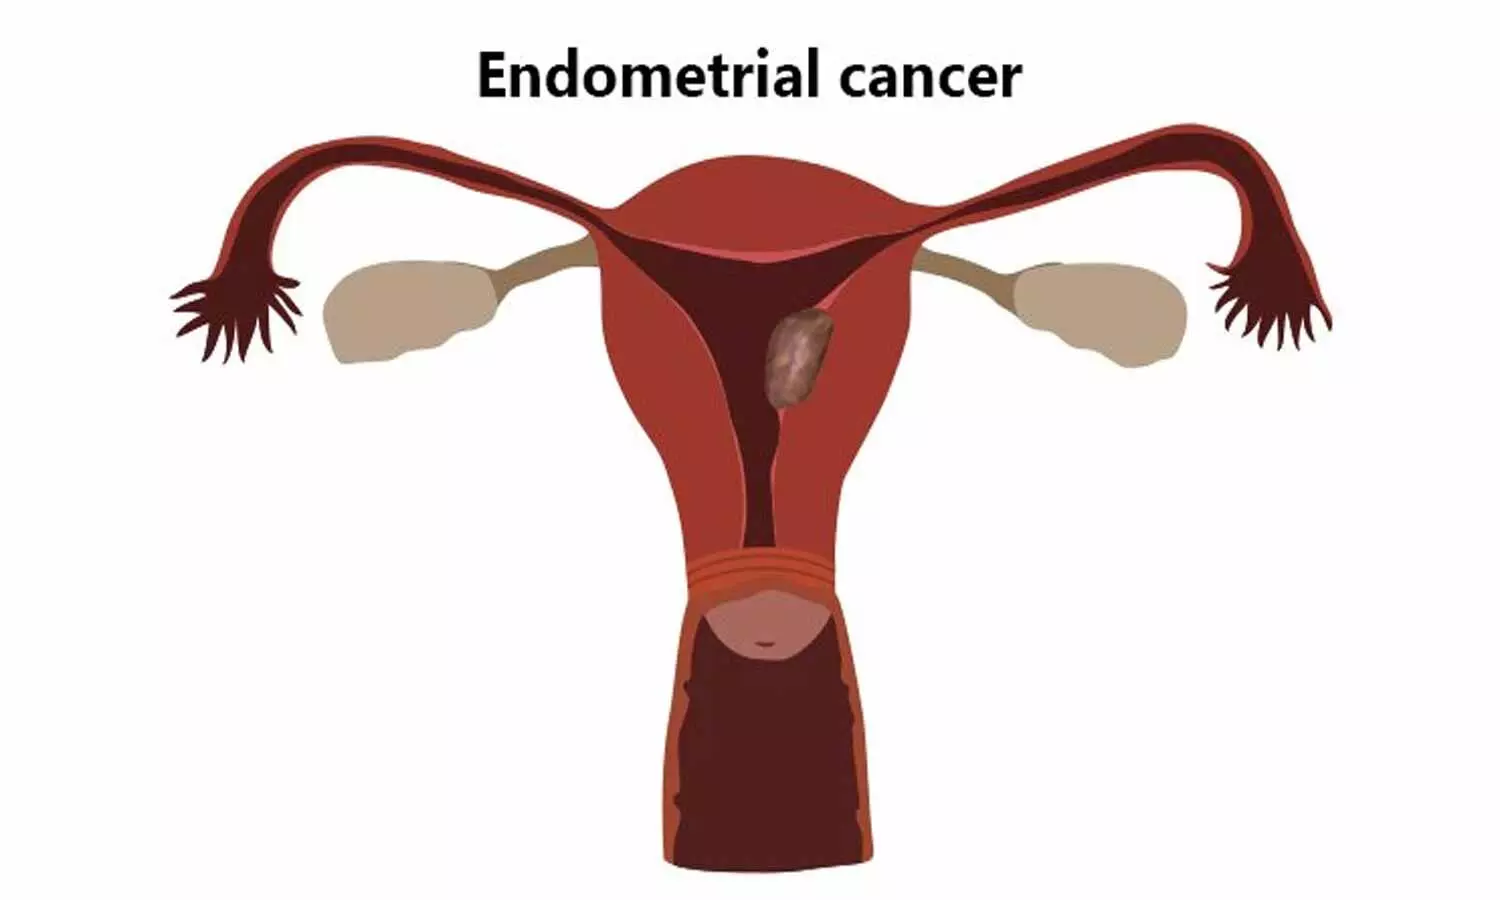 Updated guideline on management of endometrial cancer: Society of gynecologic oncology